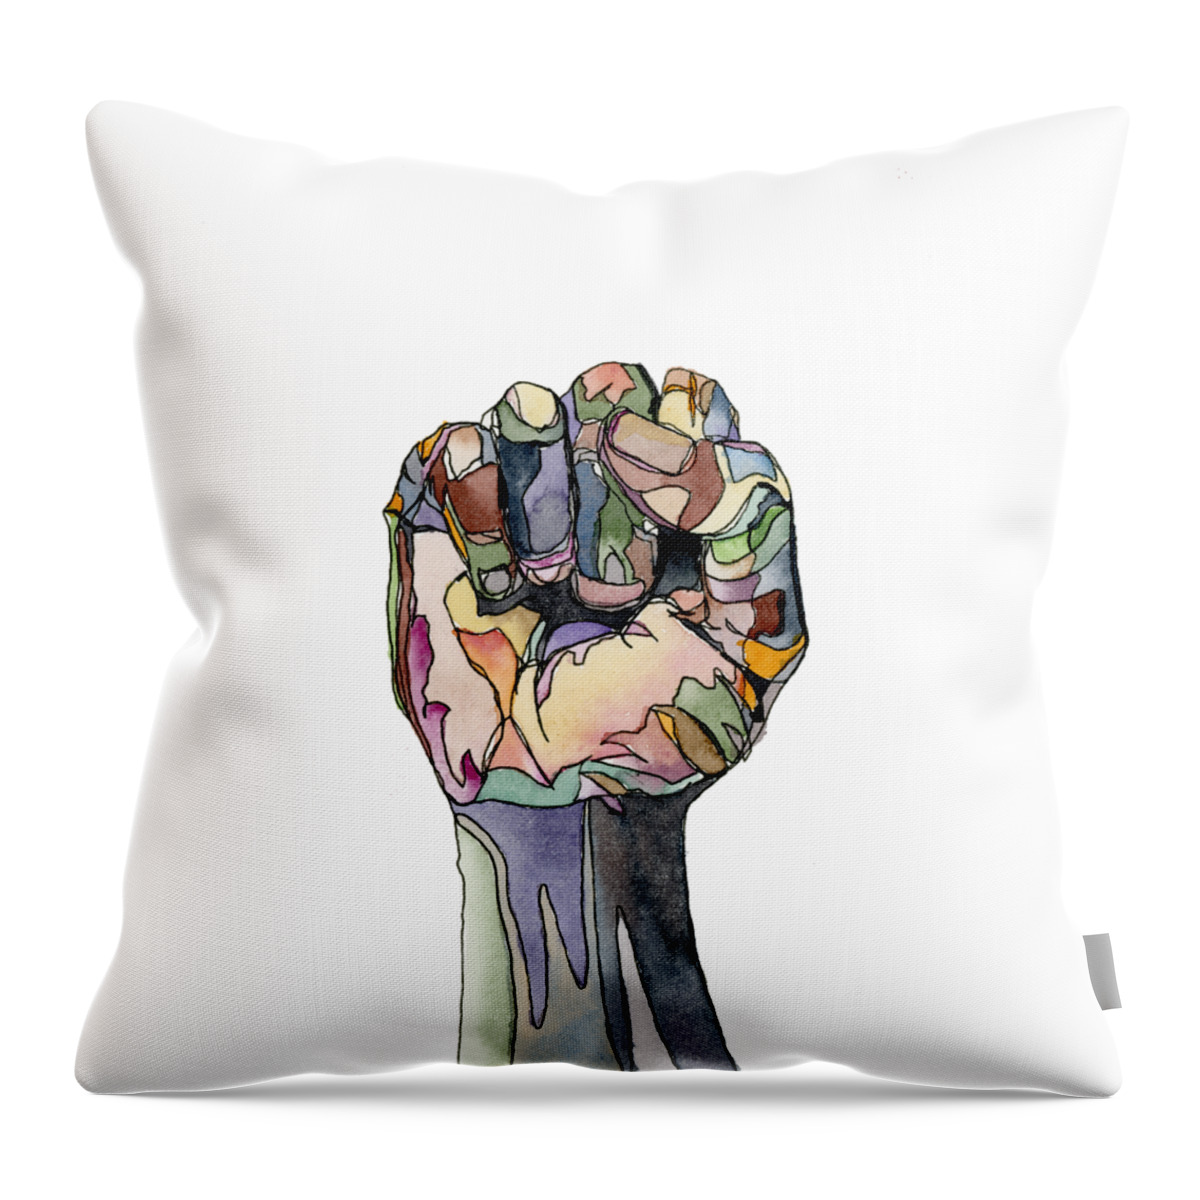 Watercolor Throw Pillow featuring the painting Infinite Hope by Breanna Crenshaw